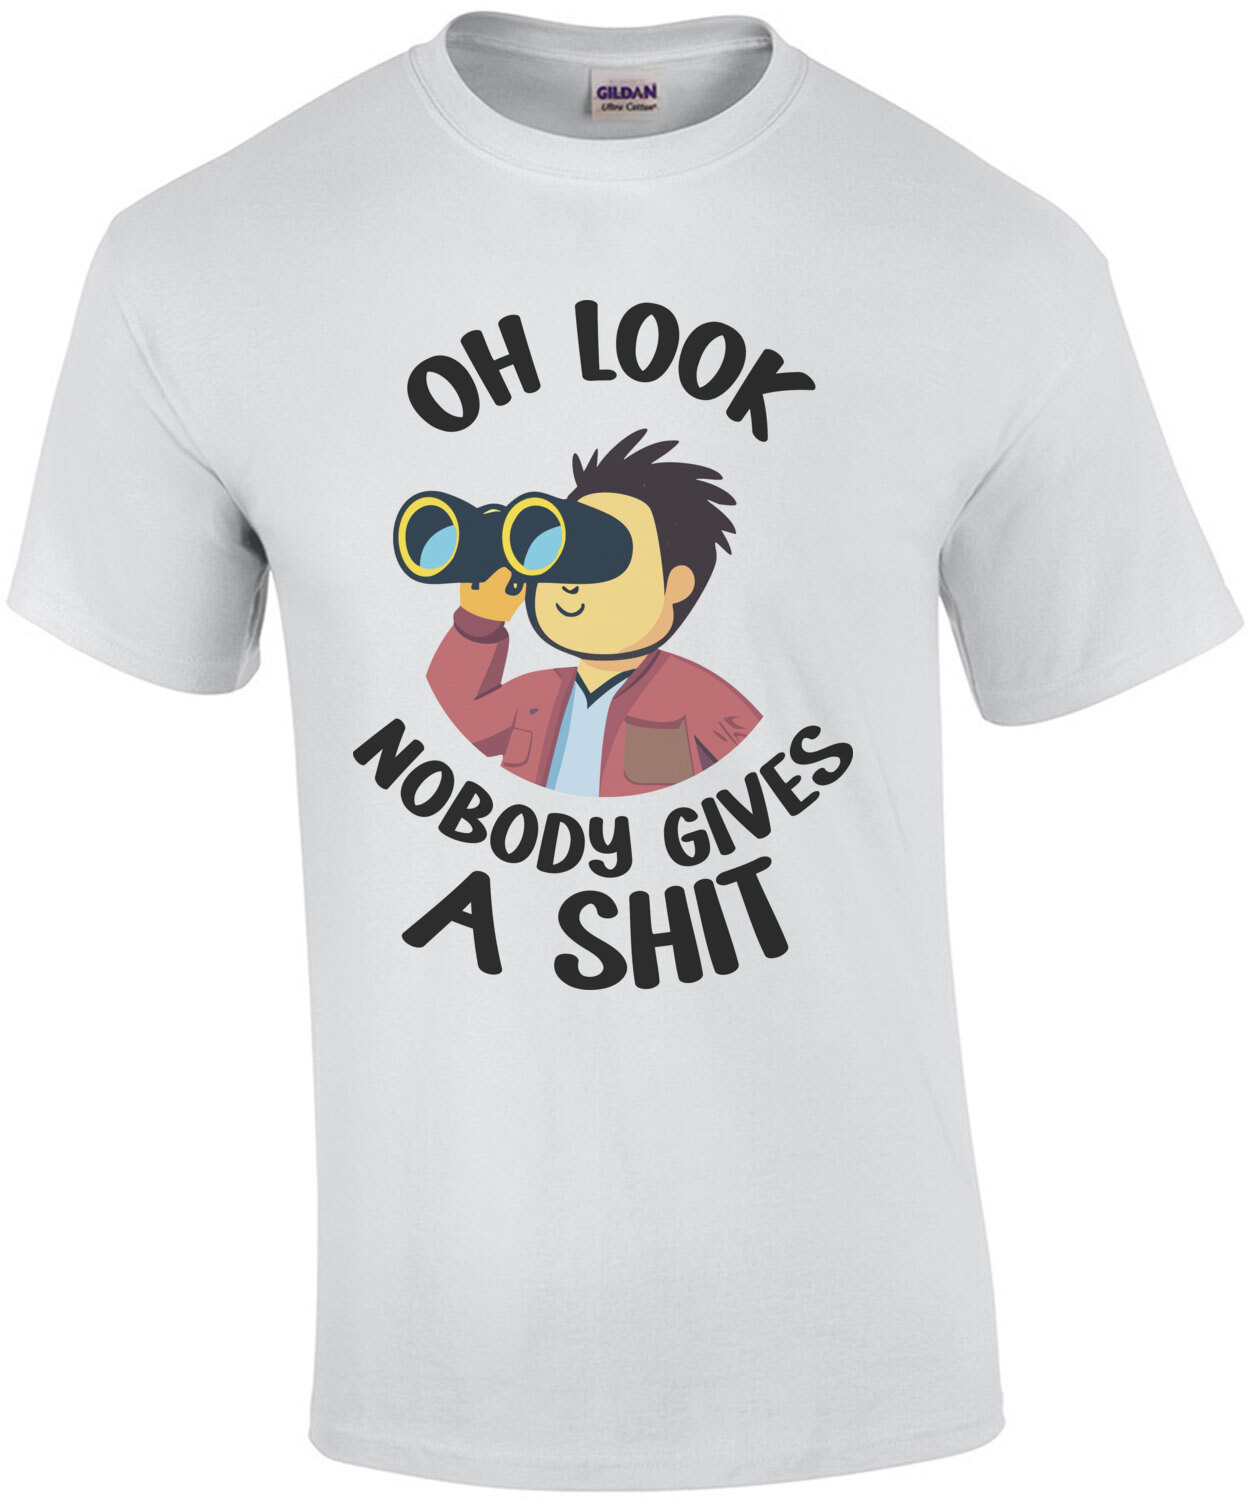 Oh look, nobody gives a shit. Funny sarcastic t-shirt